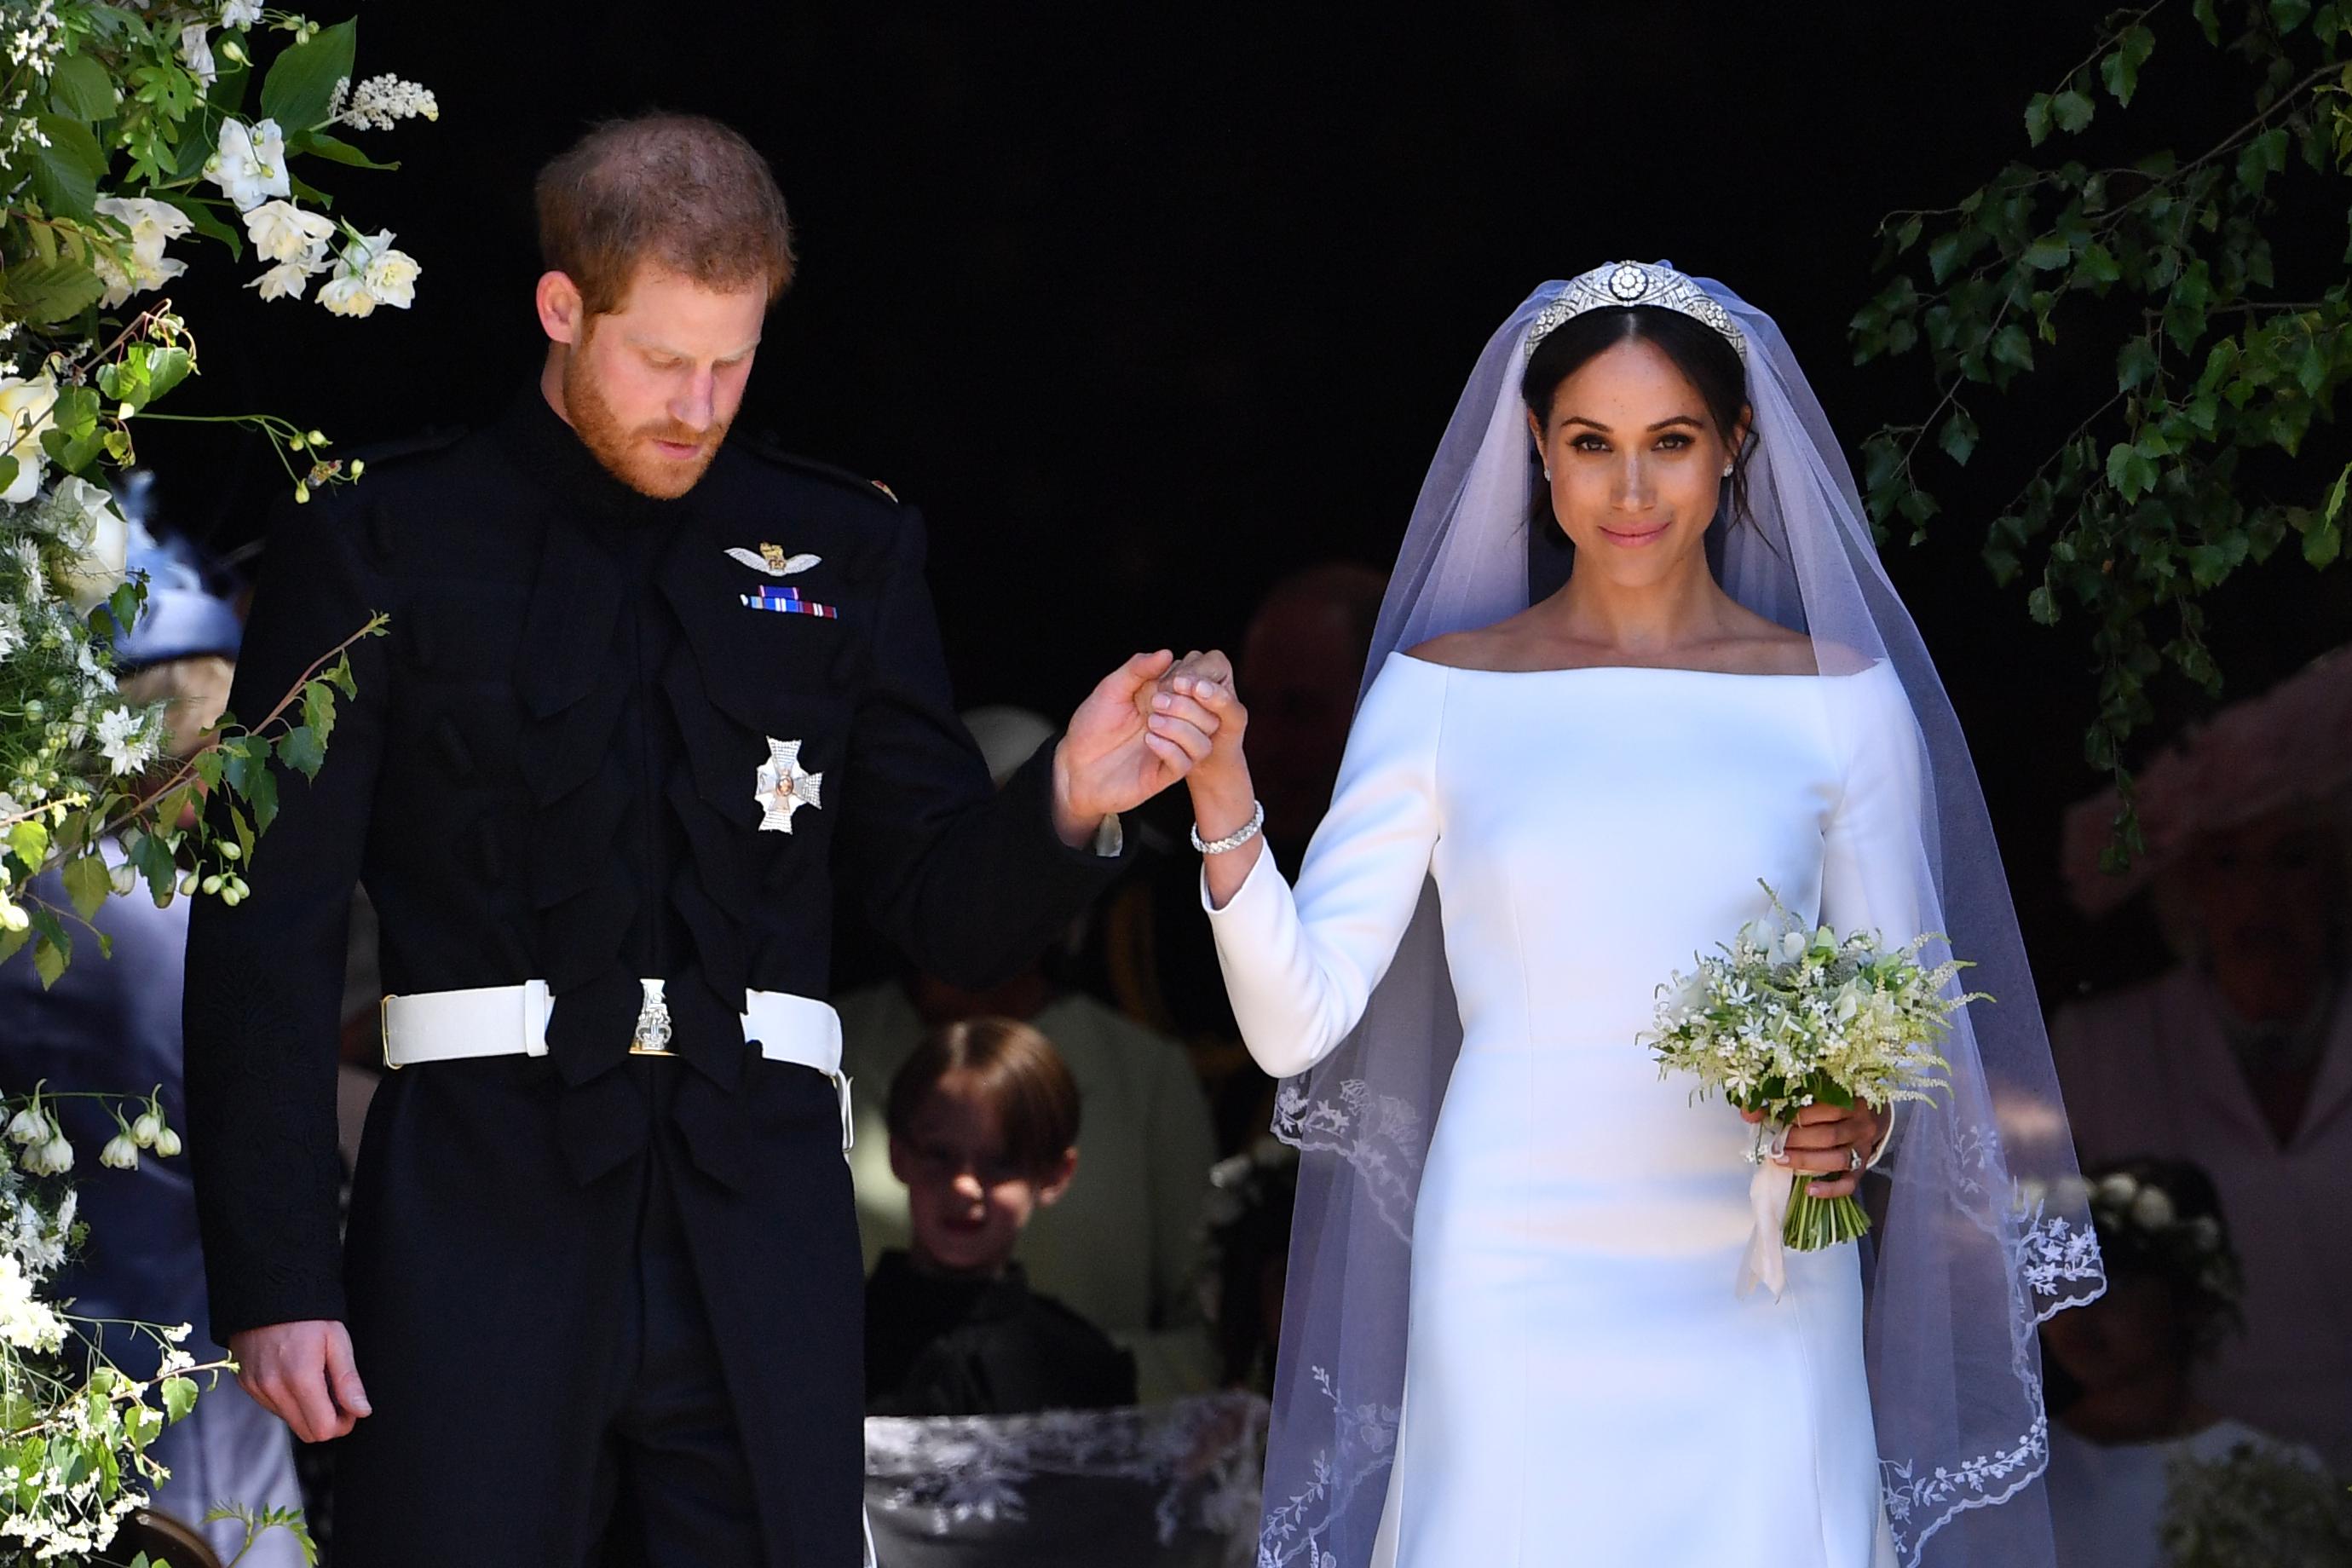 Prince Harry holds Meghan's hand as they emerge from the West Door of St George's Chapel, Windsor Castle, after their wedding ceremony.